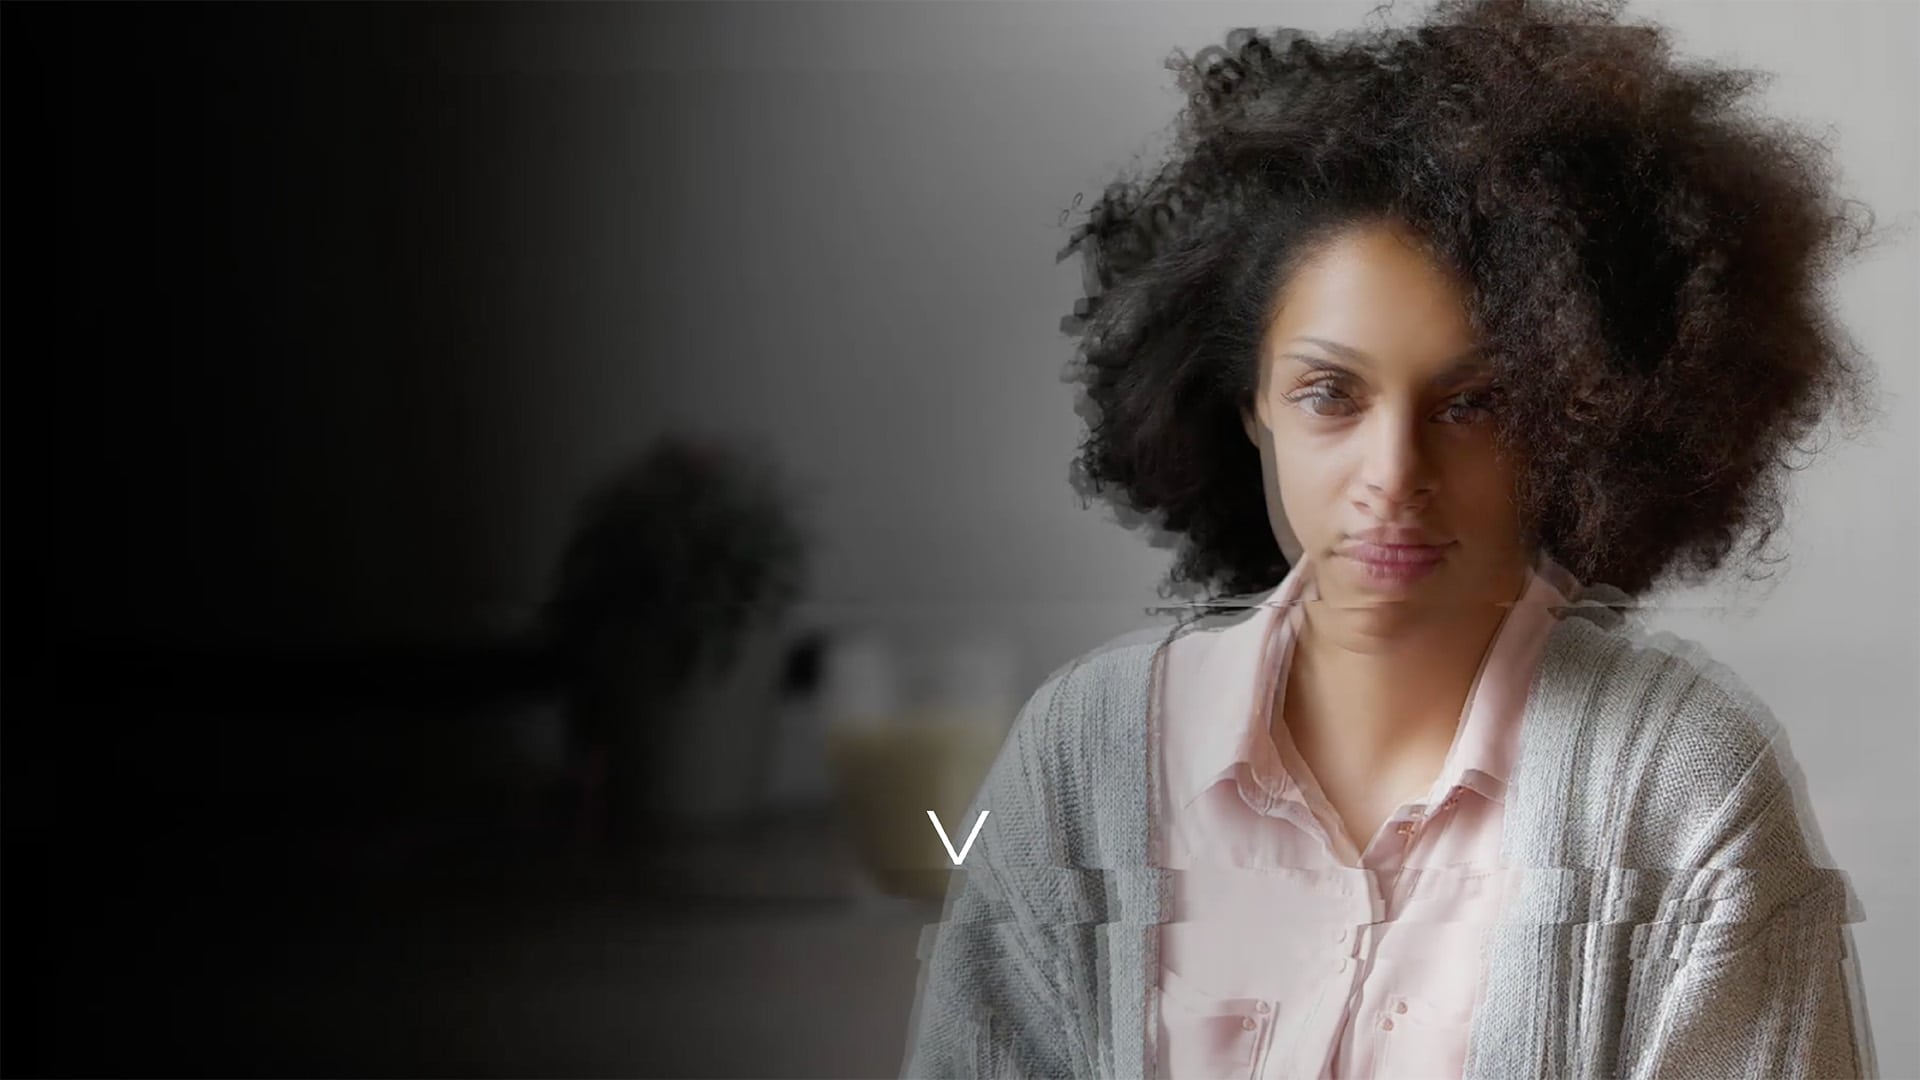 Real Leadership Consultancy RLC Video Transition Effect showing a distorted image of a woman with curly hair